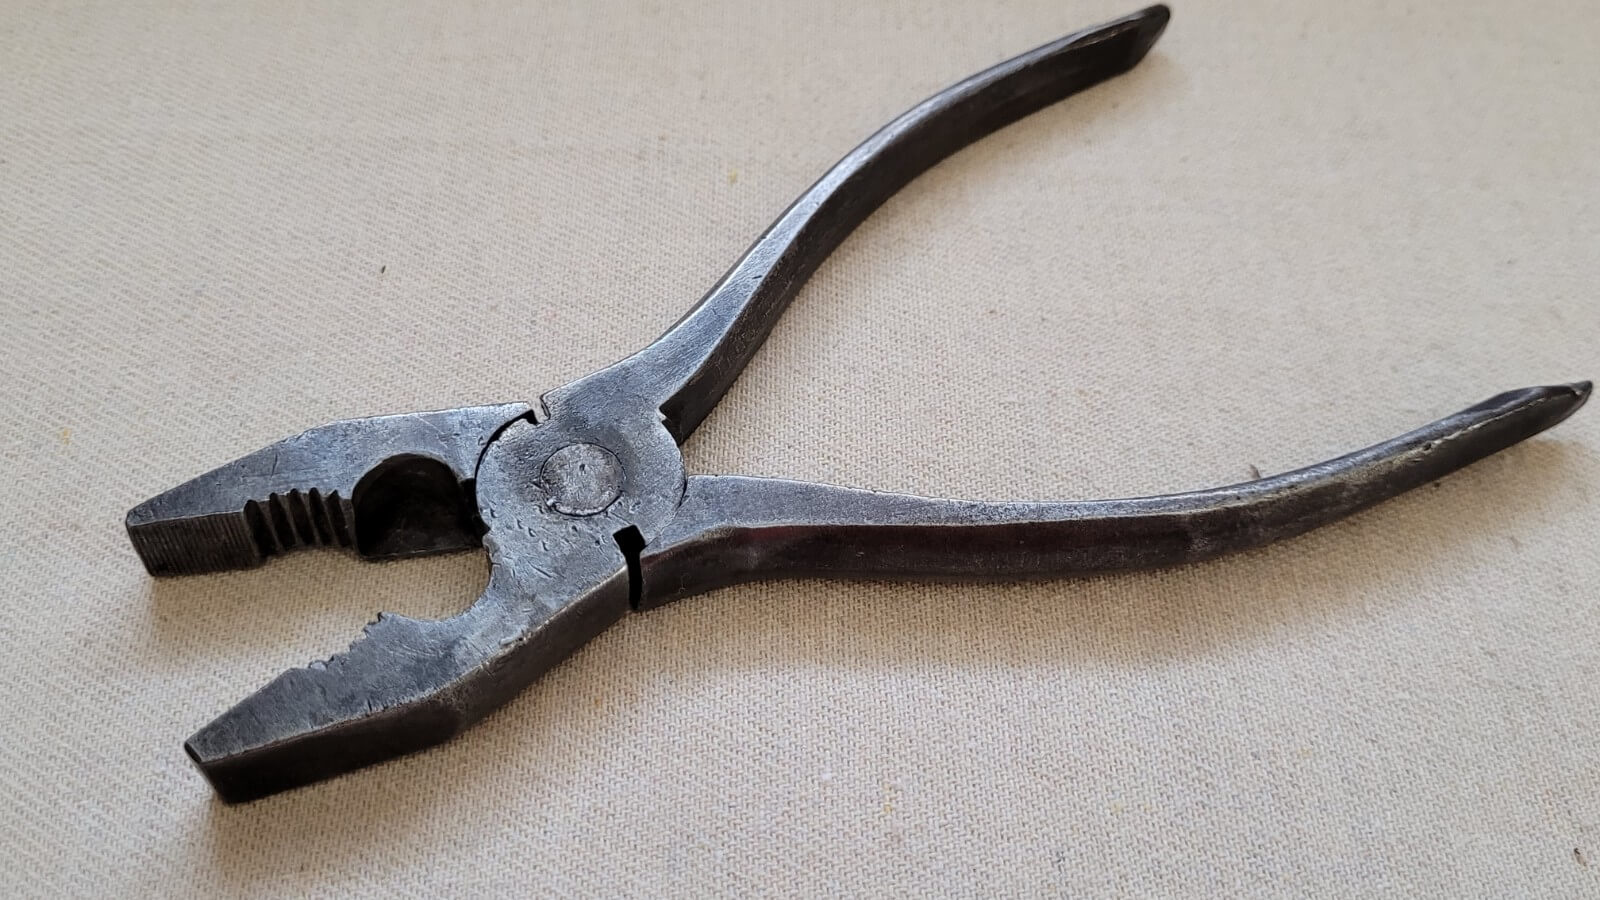 Rare Granit Tool Company 8 Inches Lineman Pliers Side Cutters New York Vintage Collectible Tools